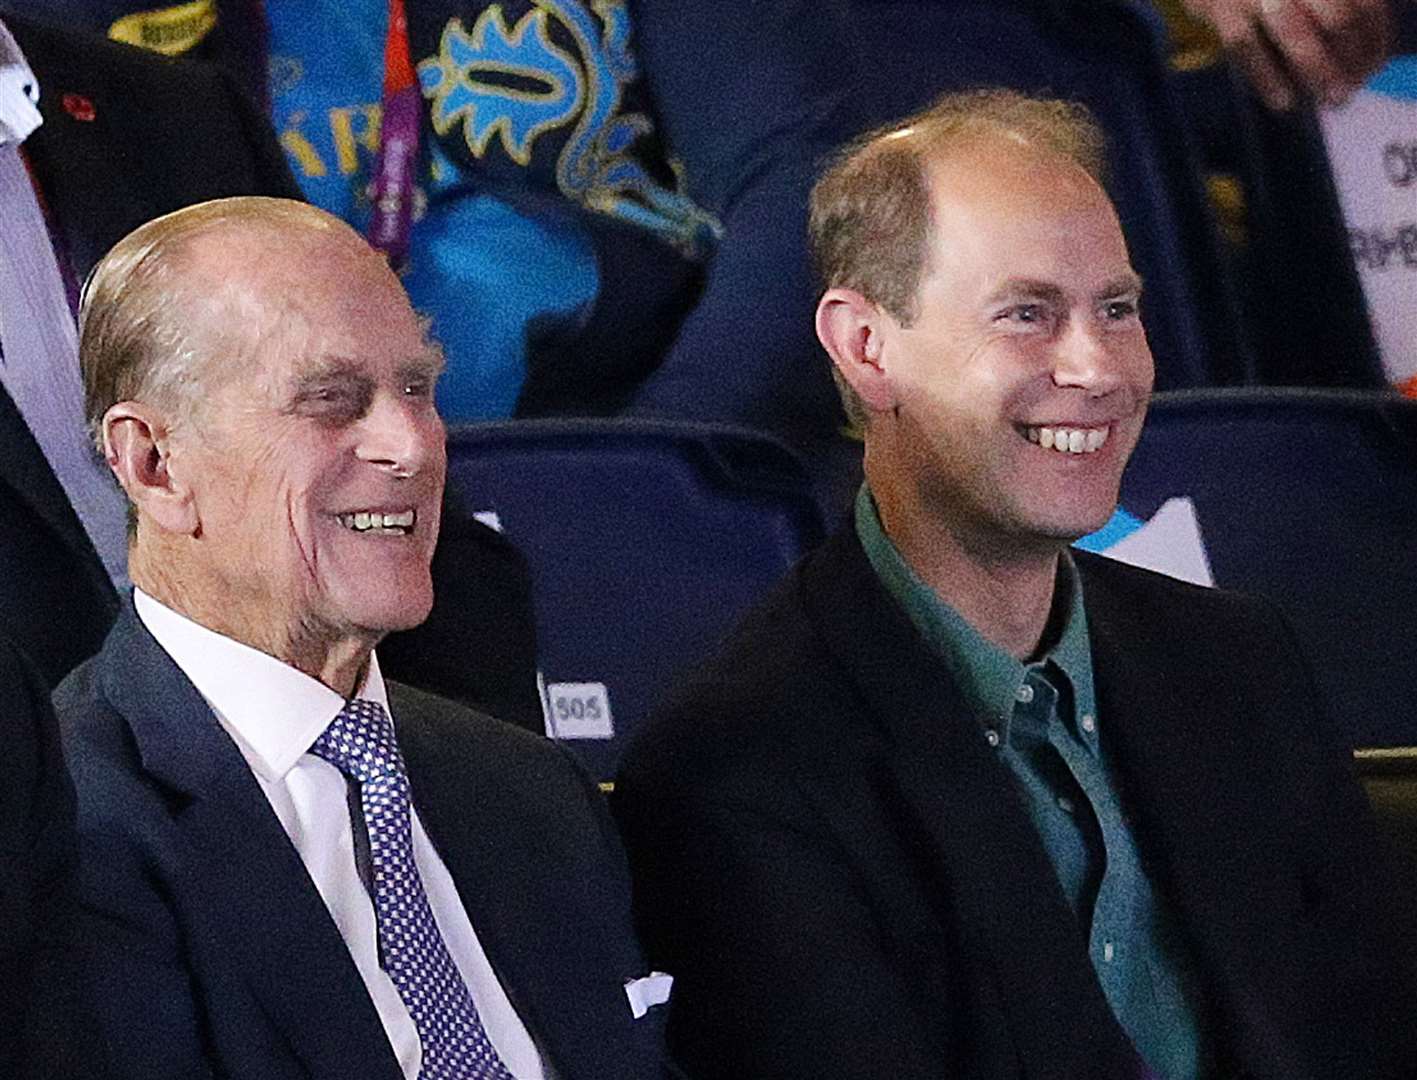 The late Duke of Edinburgh (left) and the then Earl of Wessex in 2012 (Julien Behal/PA)